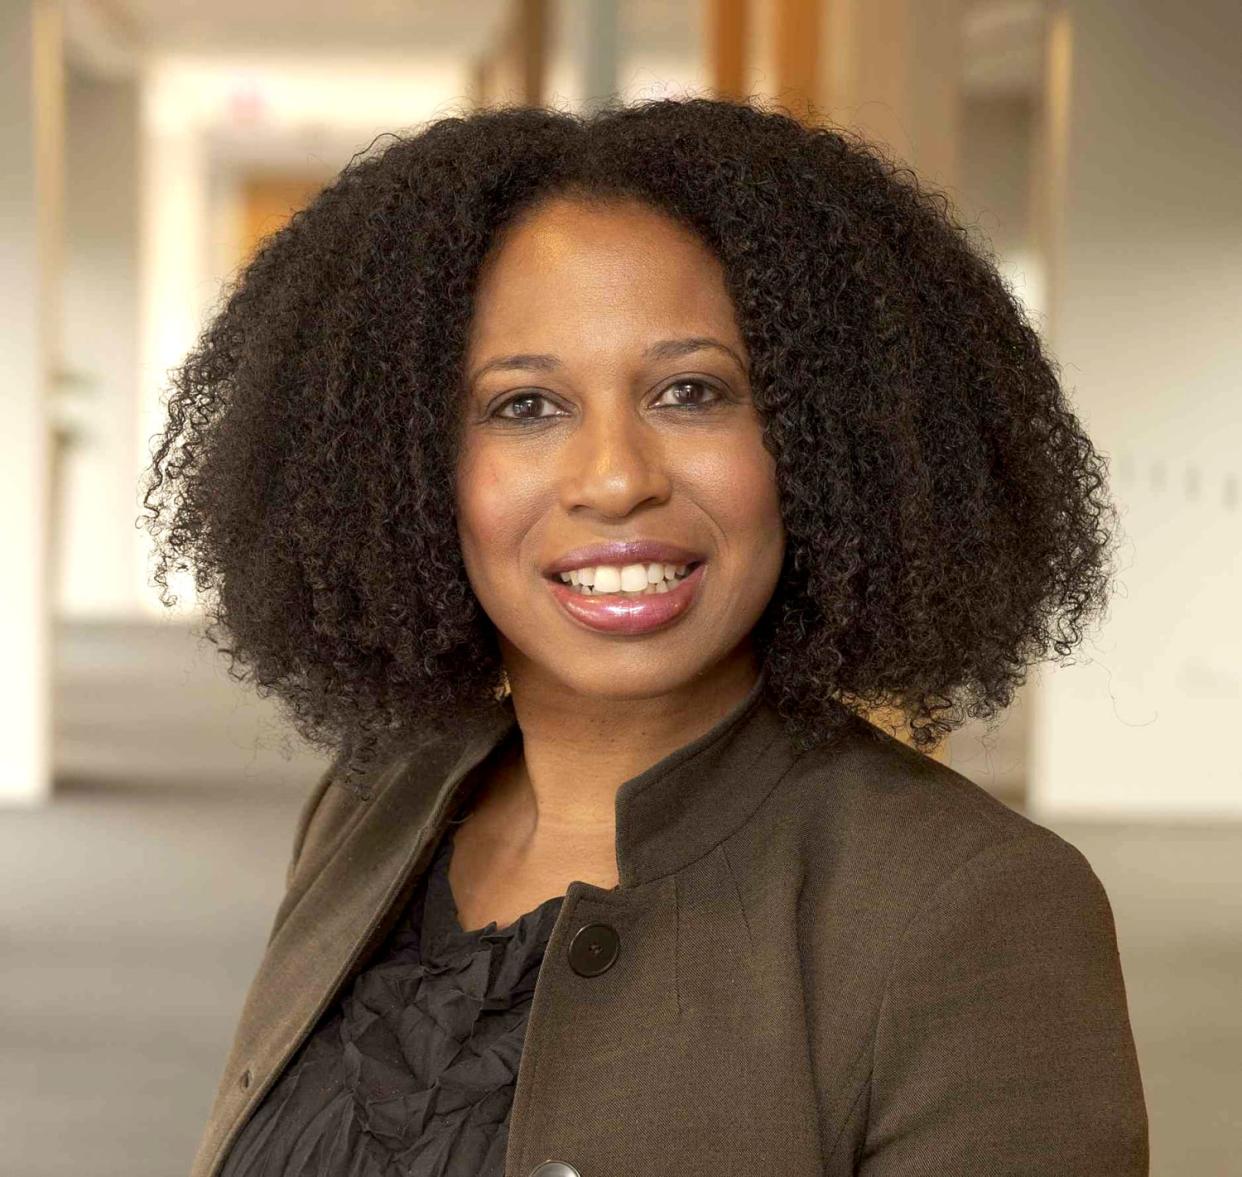 Dr. Aletha Maybank said institutions must build relationships with black communities to gain trust in clinical trials. (Ted Grudzinski / American Medical Association)